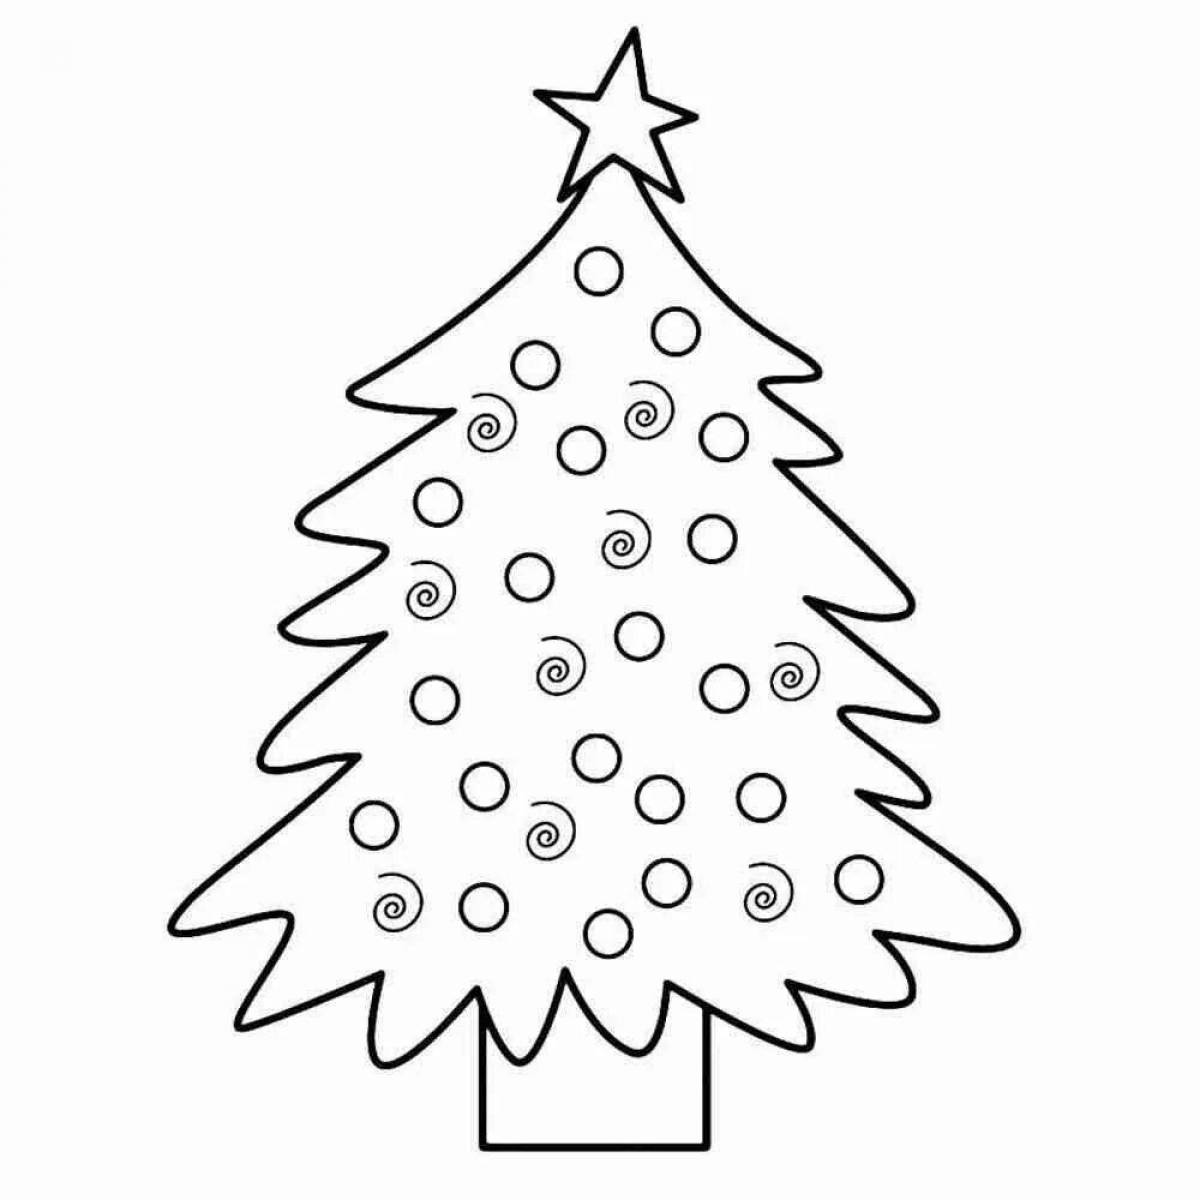 Bright drawing of a Christmas tree